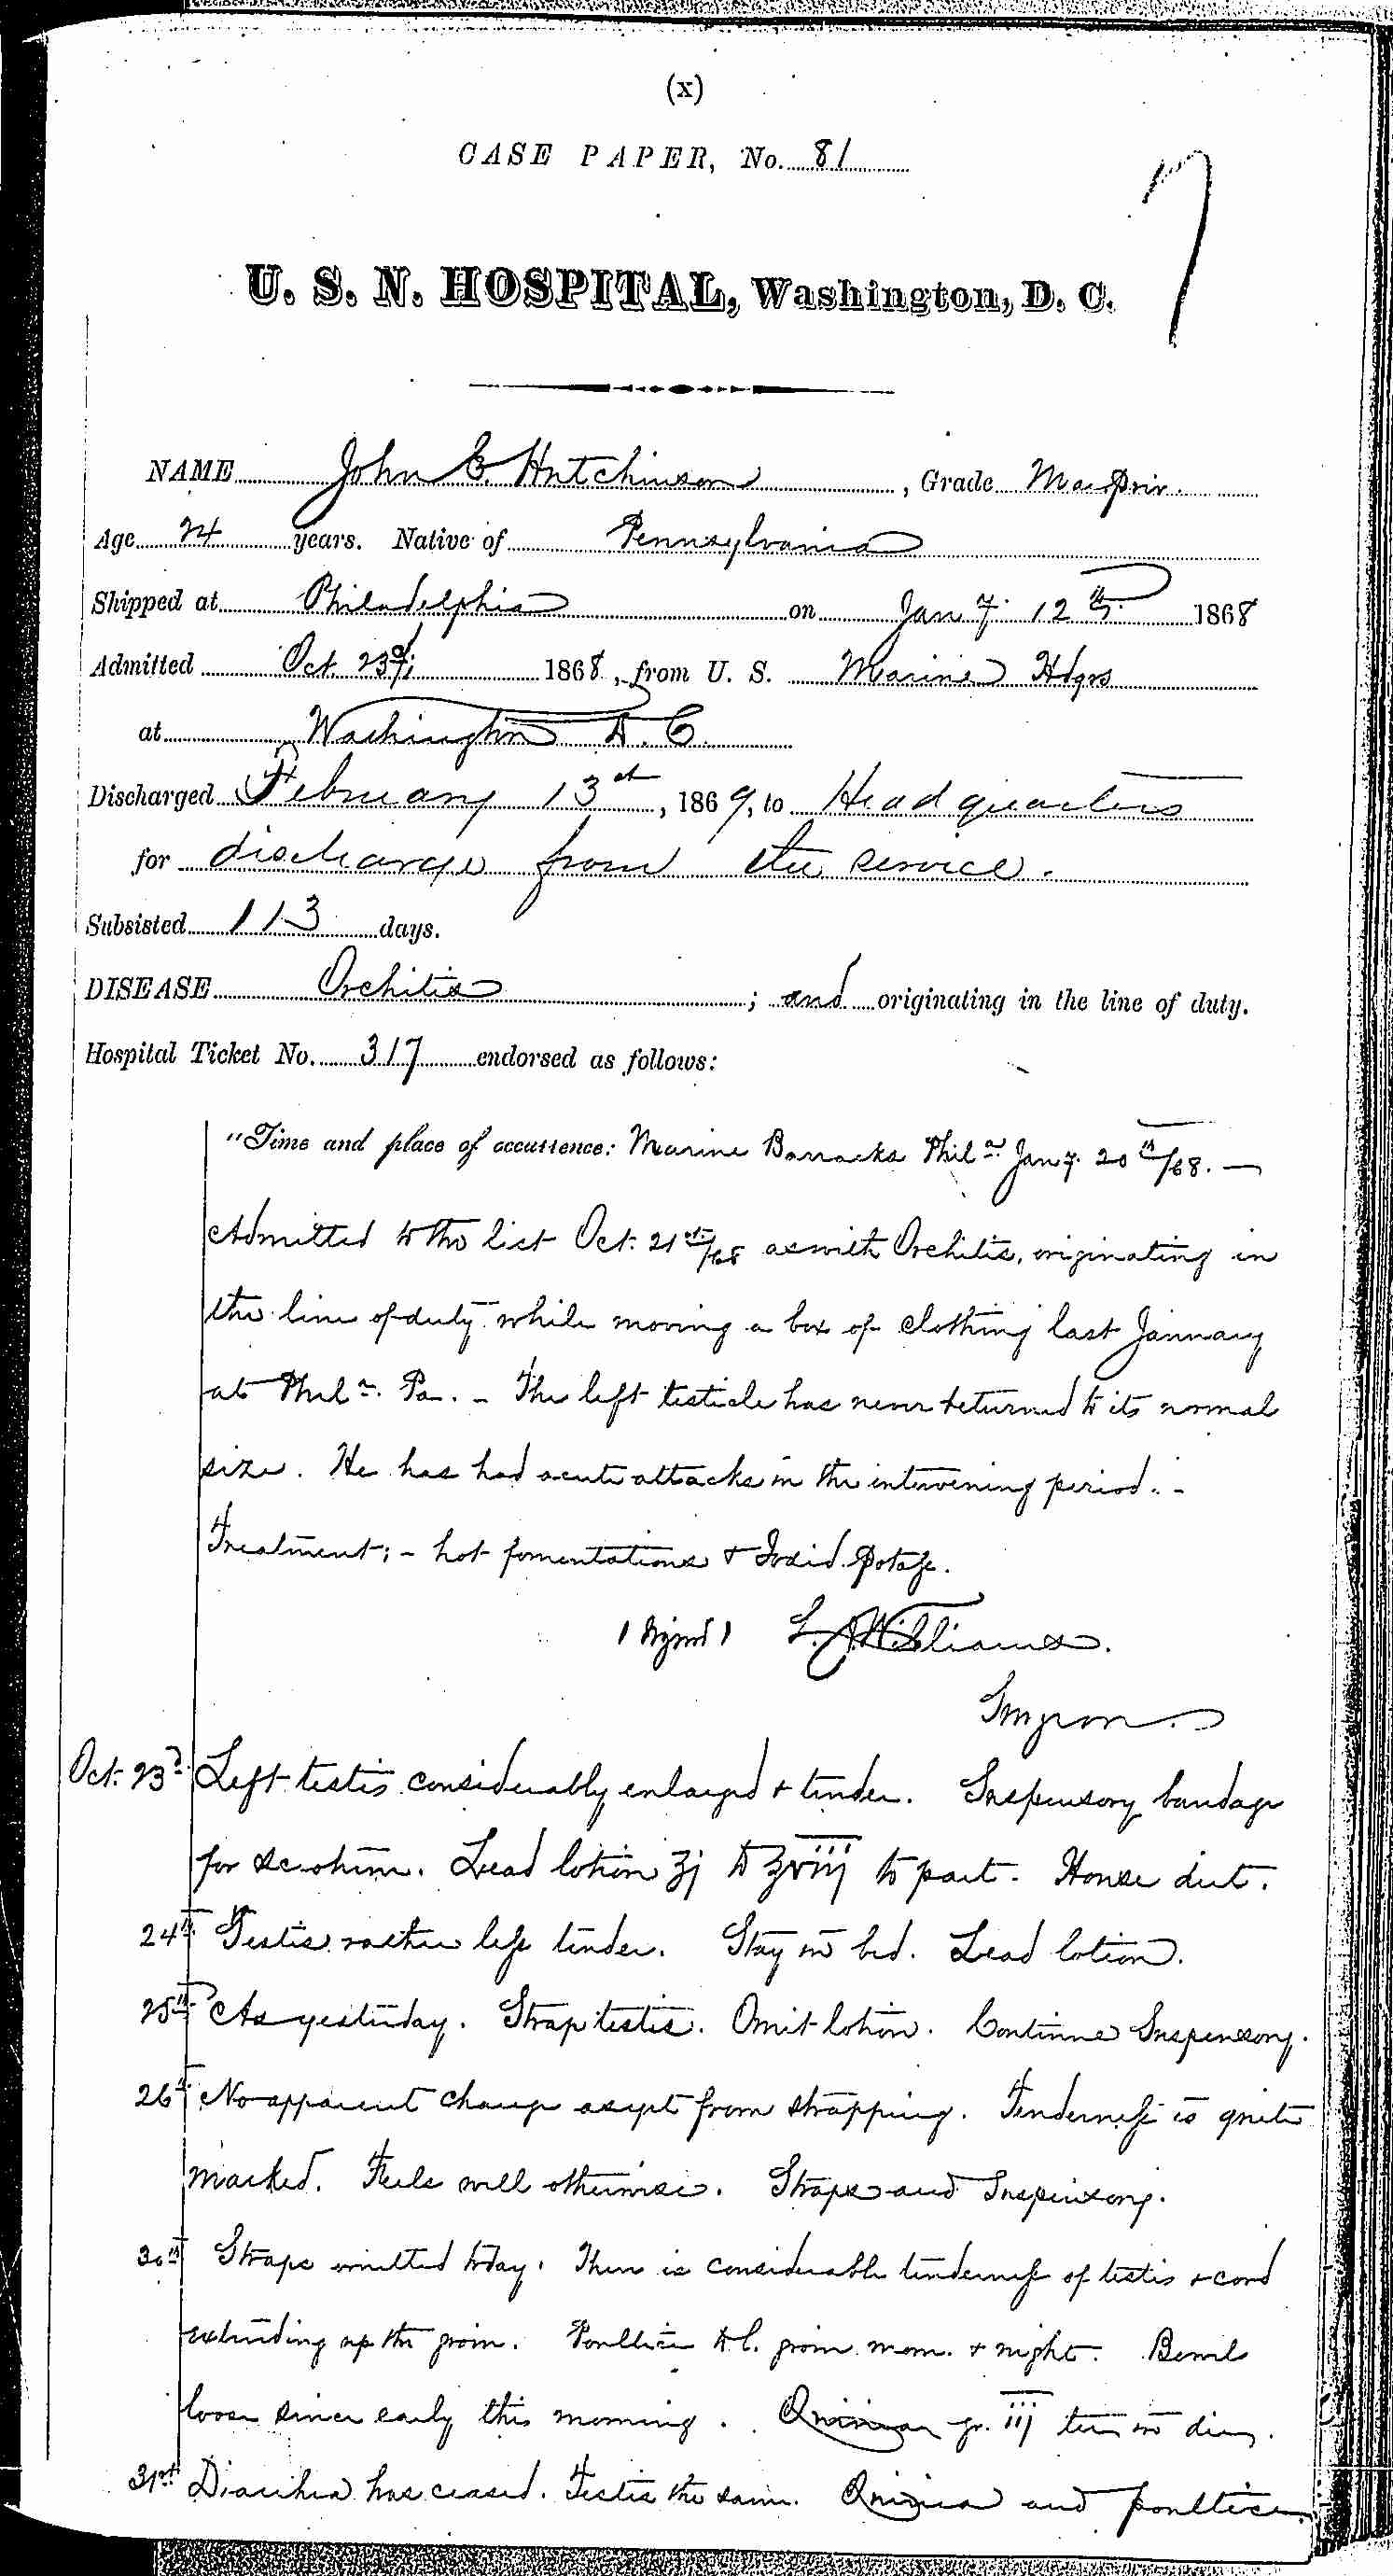 Entry for John C. Hutchinson (page 1 of 4) in the log Hospital Tickets and Case Papers - Naval Hospital - Washington, D.C. - 1868-69